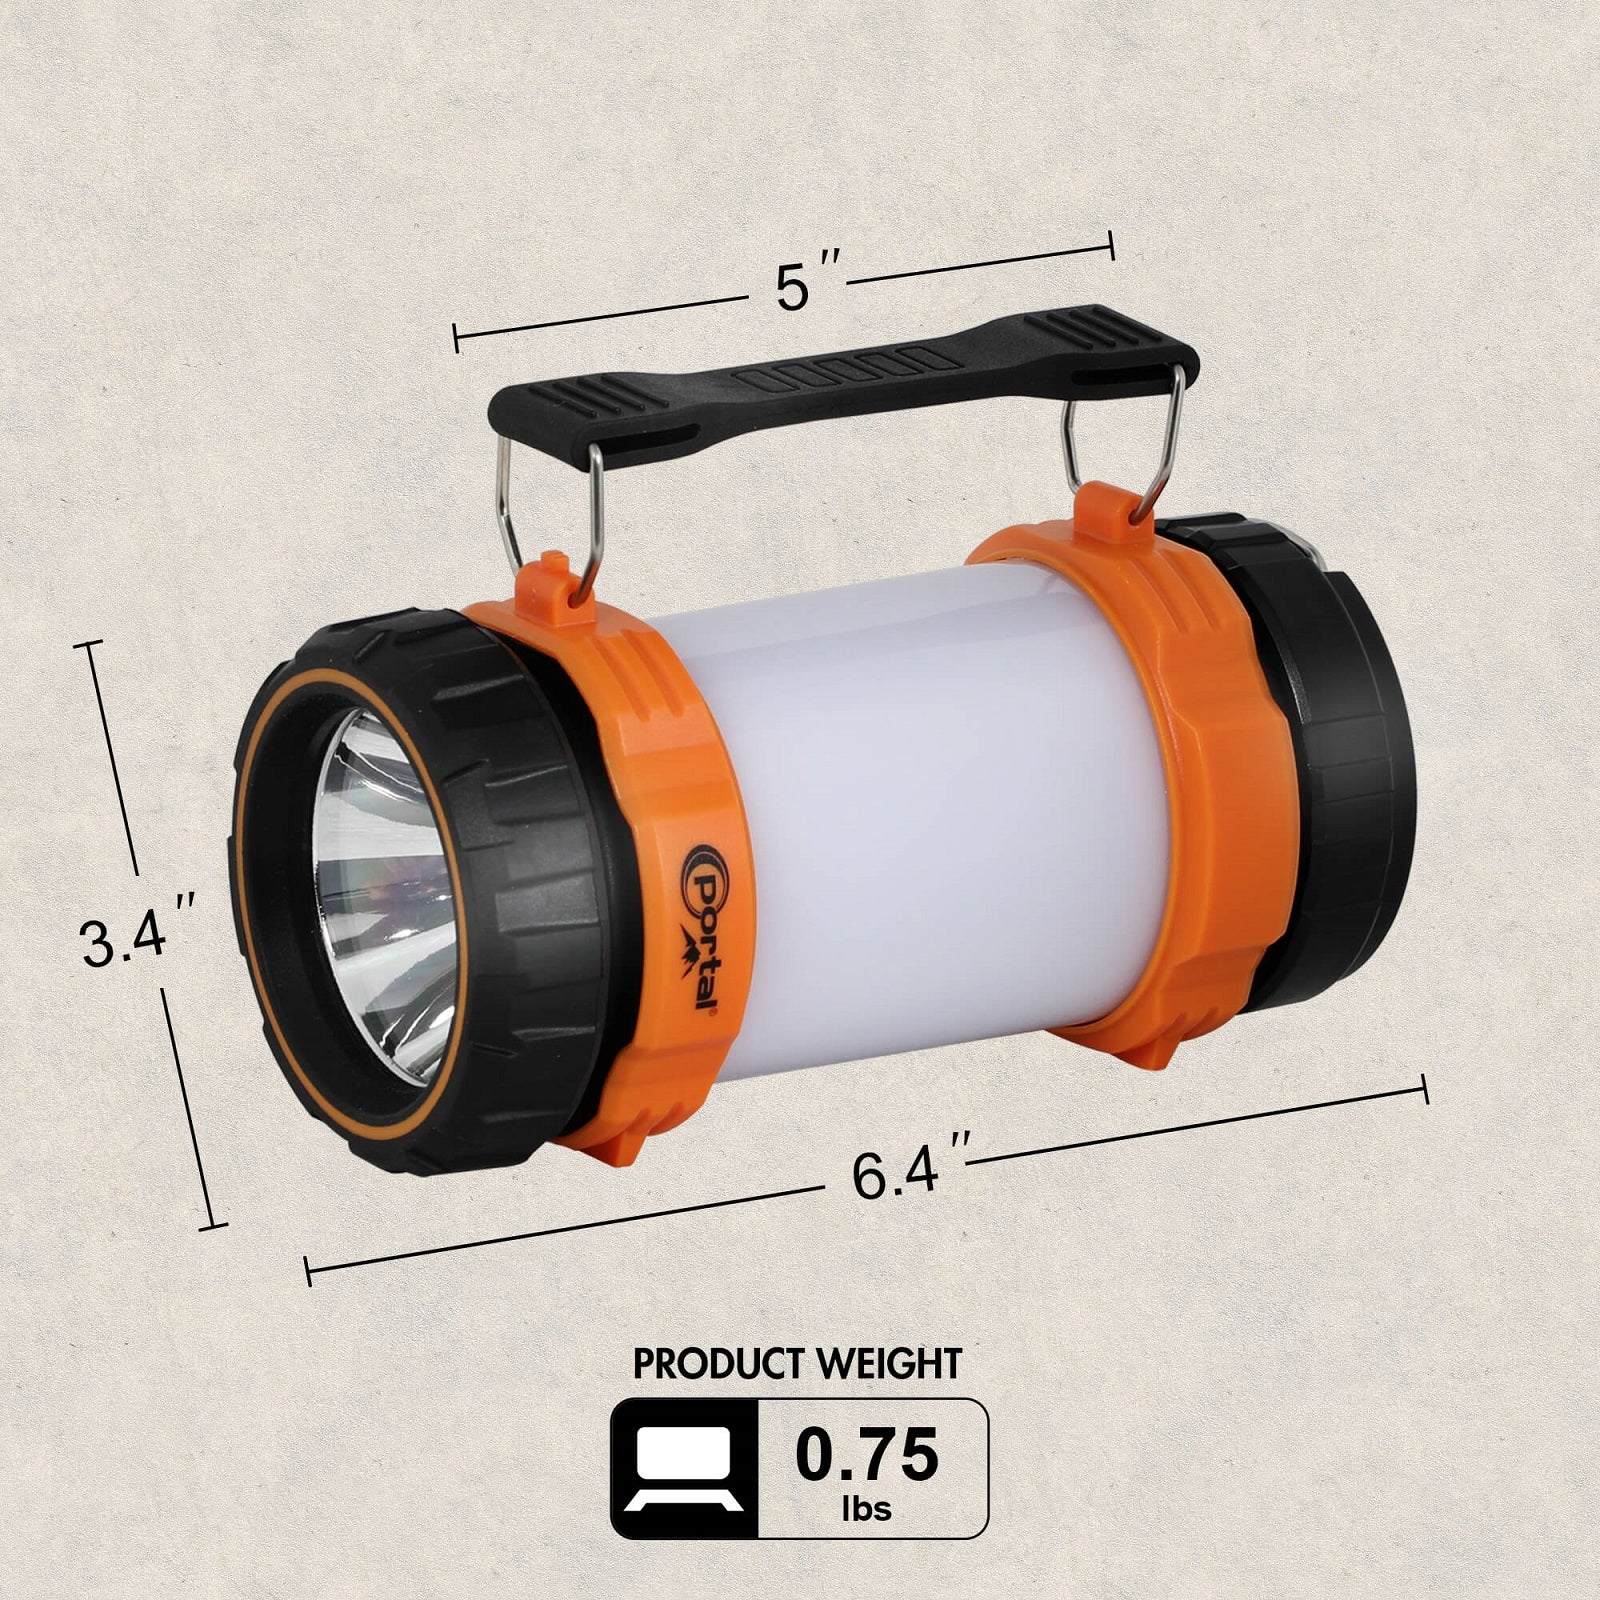 Led Camping Lantern Rechargeable, 3-in-1 Multifunctional Combo Camping